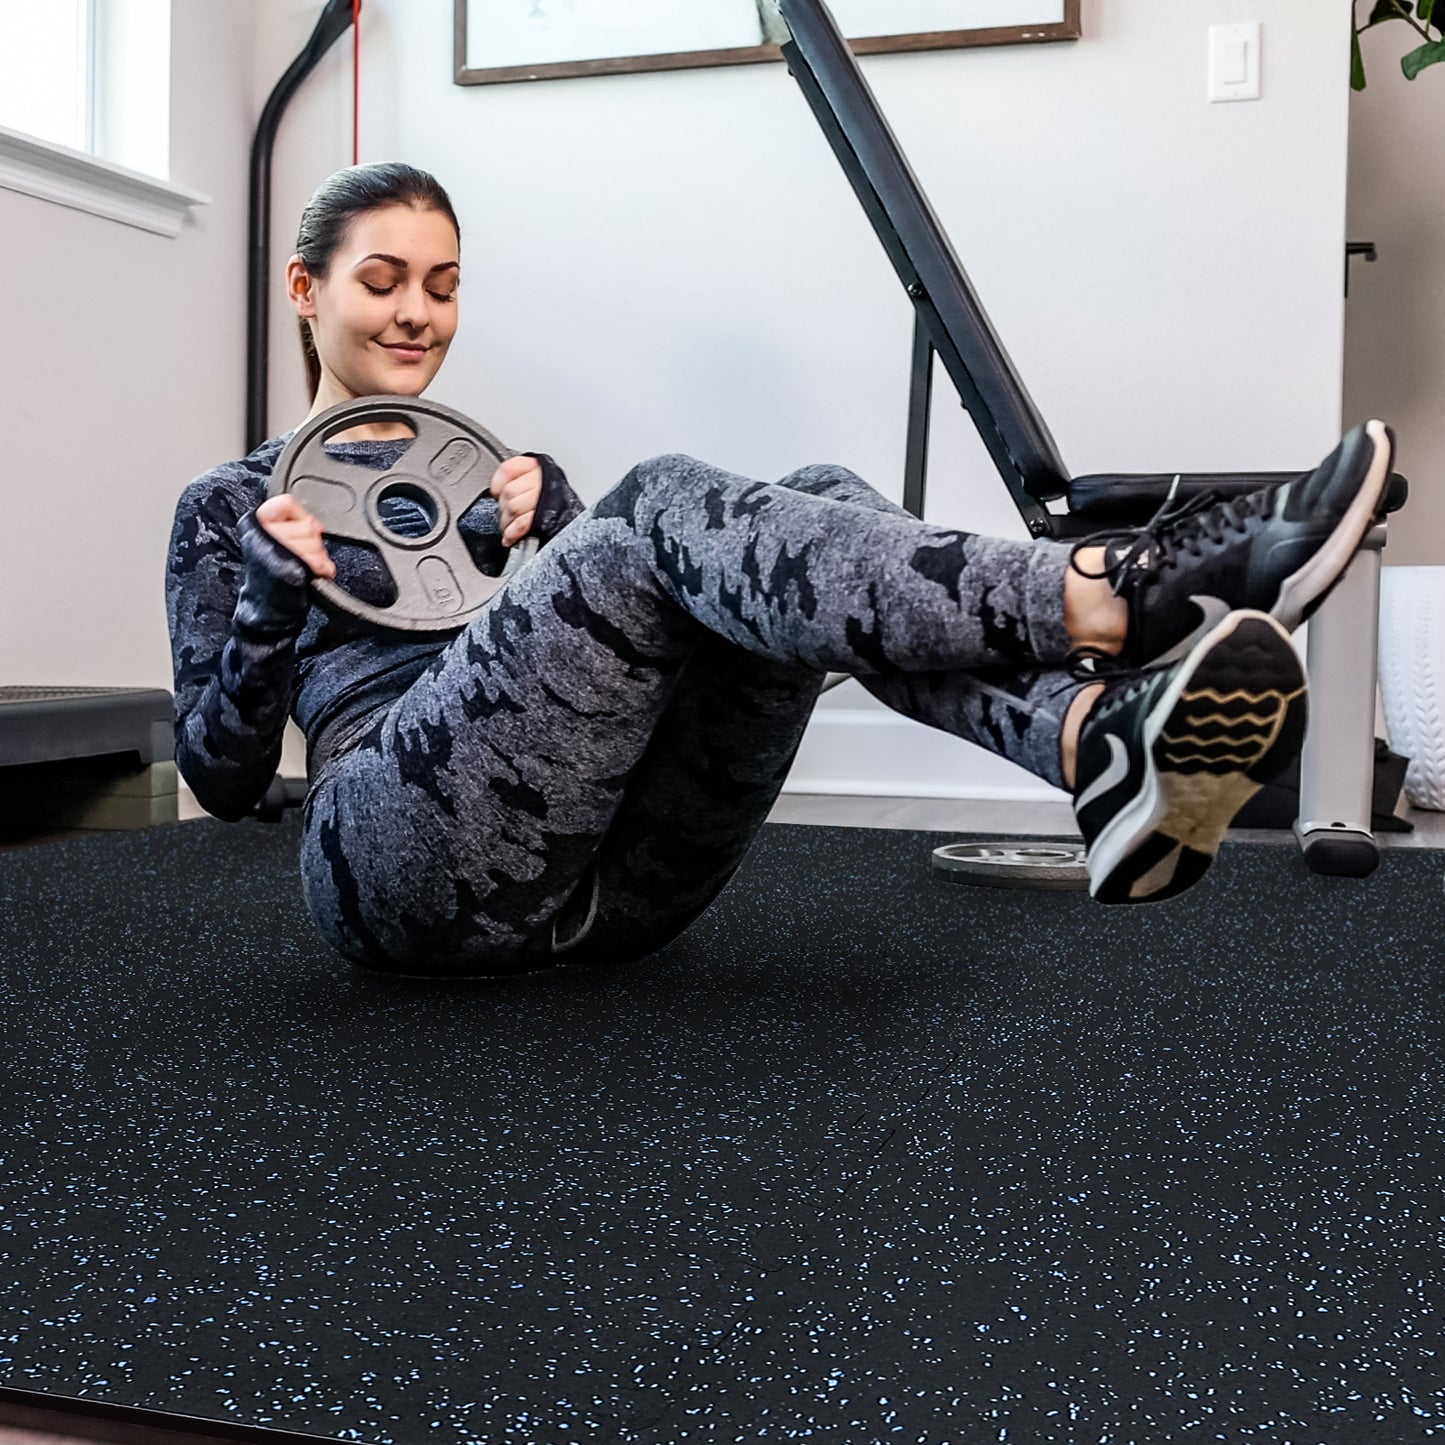 SUPERJARE 056“ Thick Exercise Equipment Mats, 48 Sq Ft EVA Foam Mats with Rubber Top - 9602L